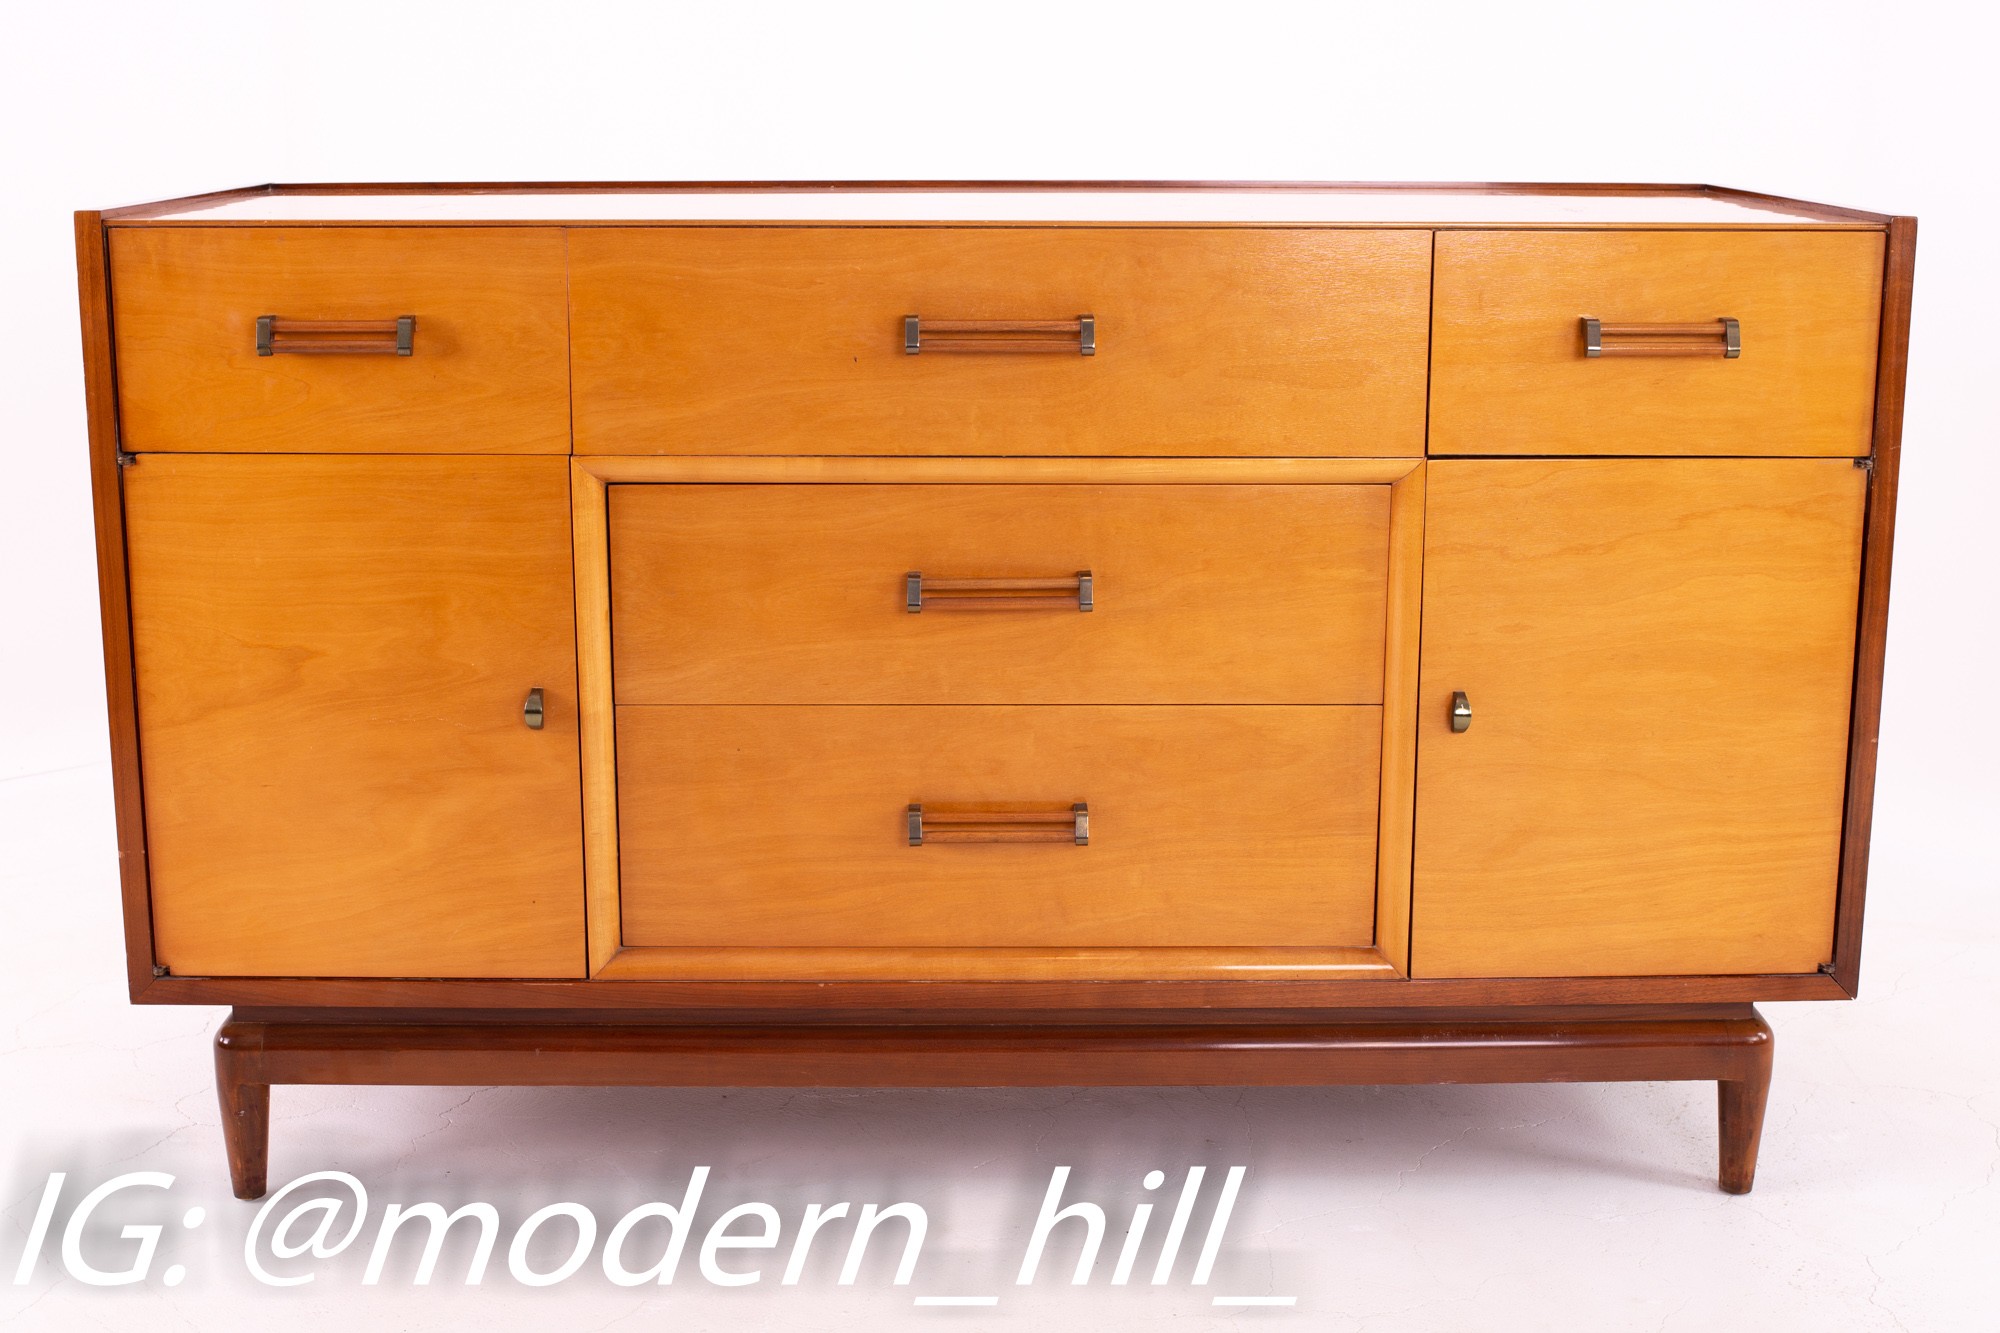 Milo Baughman for Drexel Todays Living Style Blonde and Brass Buffet Sideboard